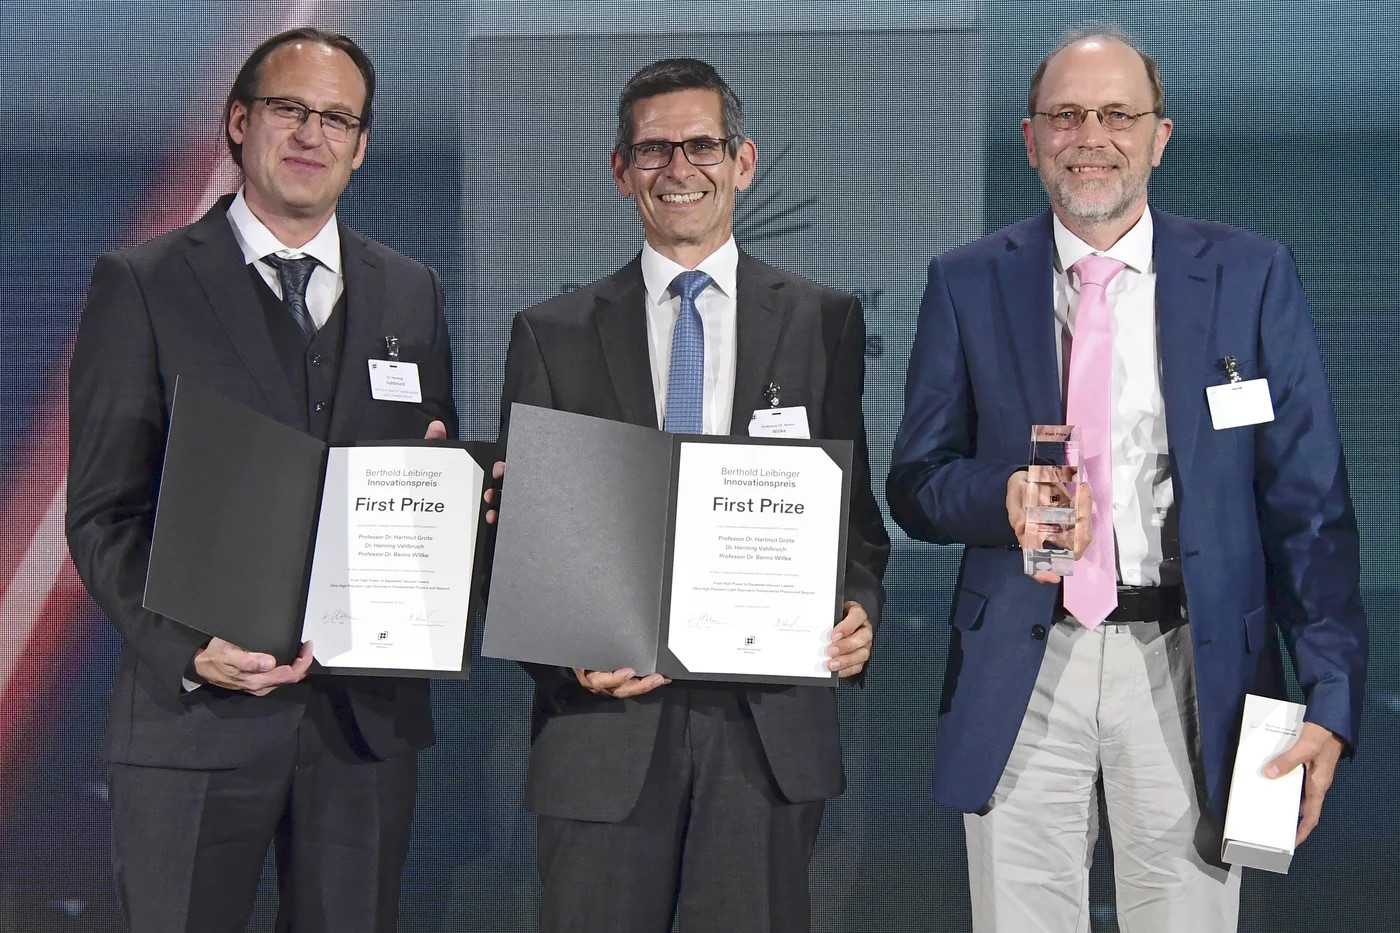 News-Image 14 of: Berthold Leibinger Stiftung honors laser researchers from Hannover and Cardiff